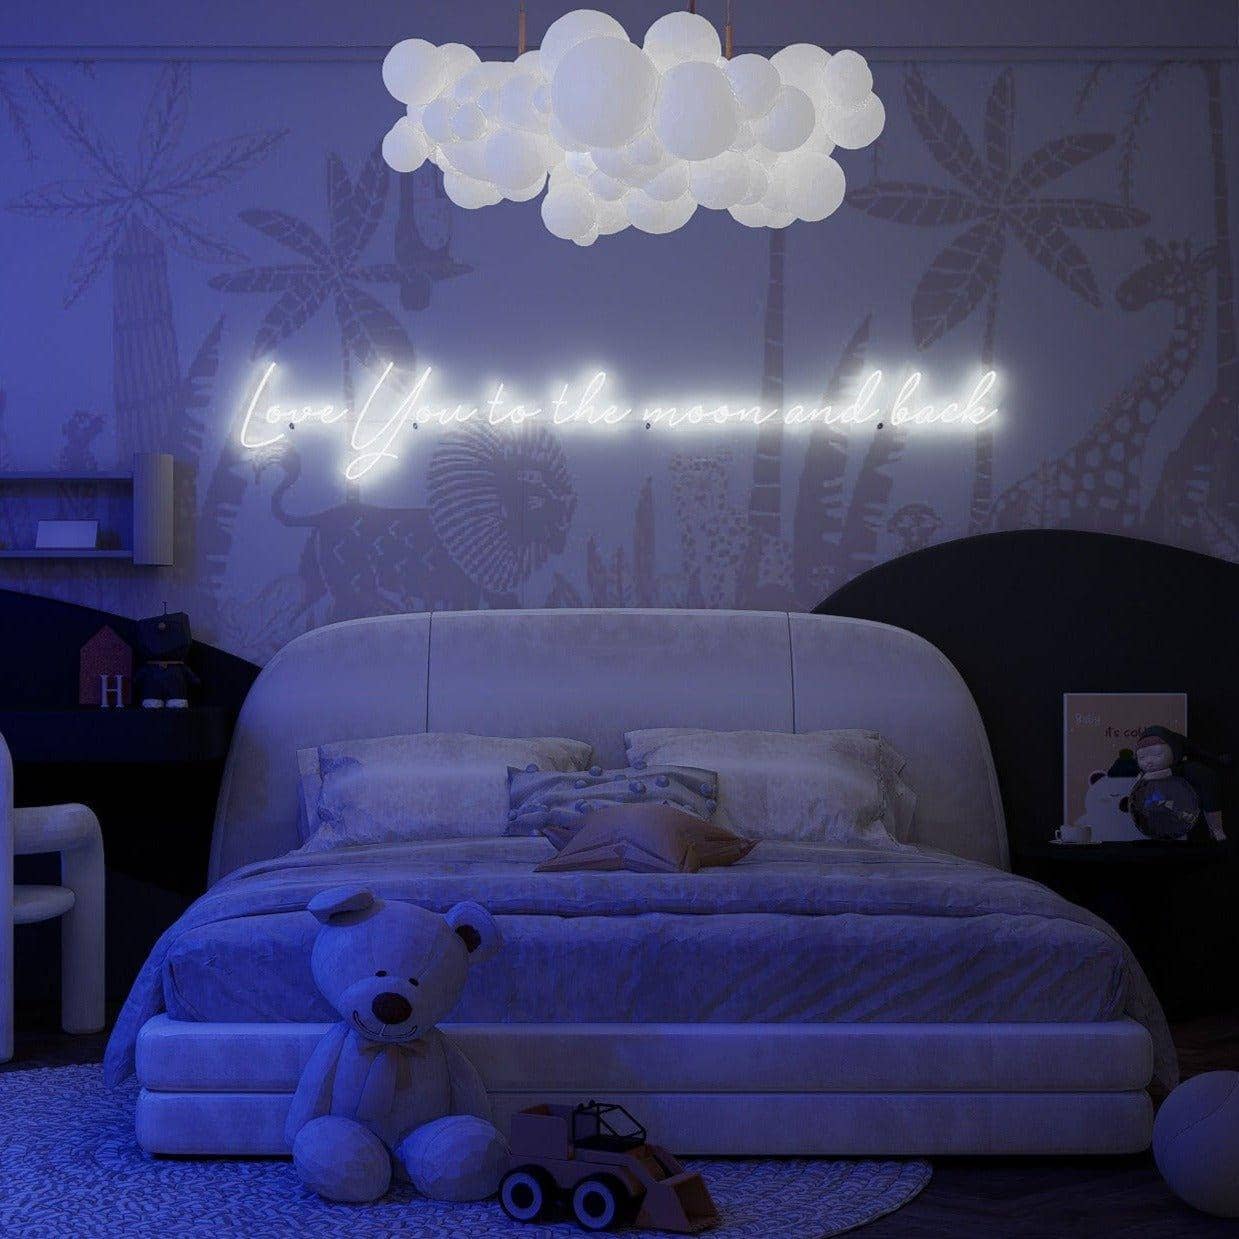 night-shot-of-lit-white-neon-lights-hanging-on-display-in-bedroom-love-you-to-the-moon-and-back